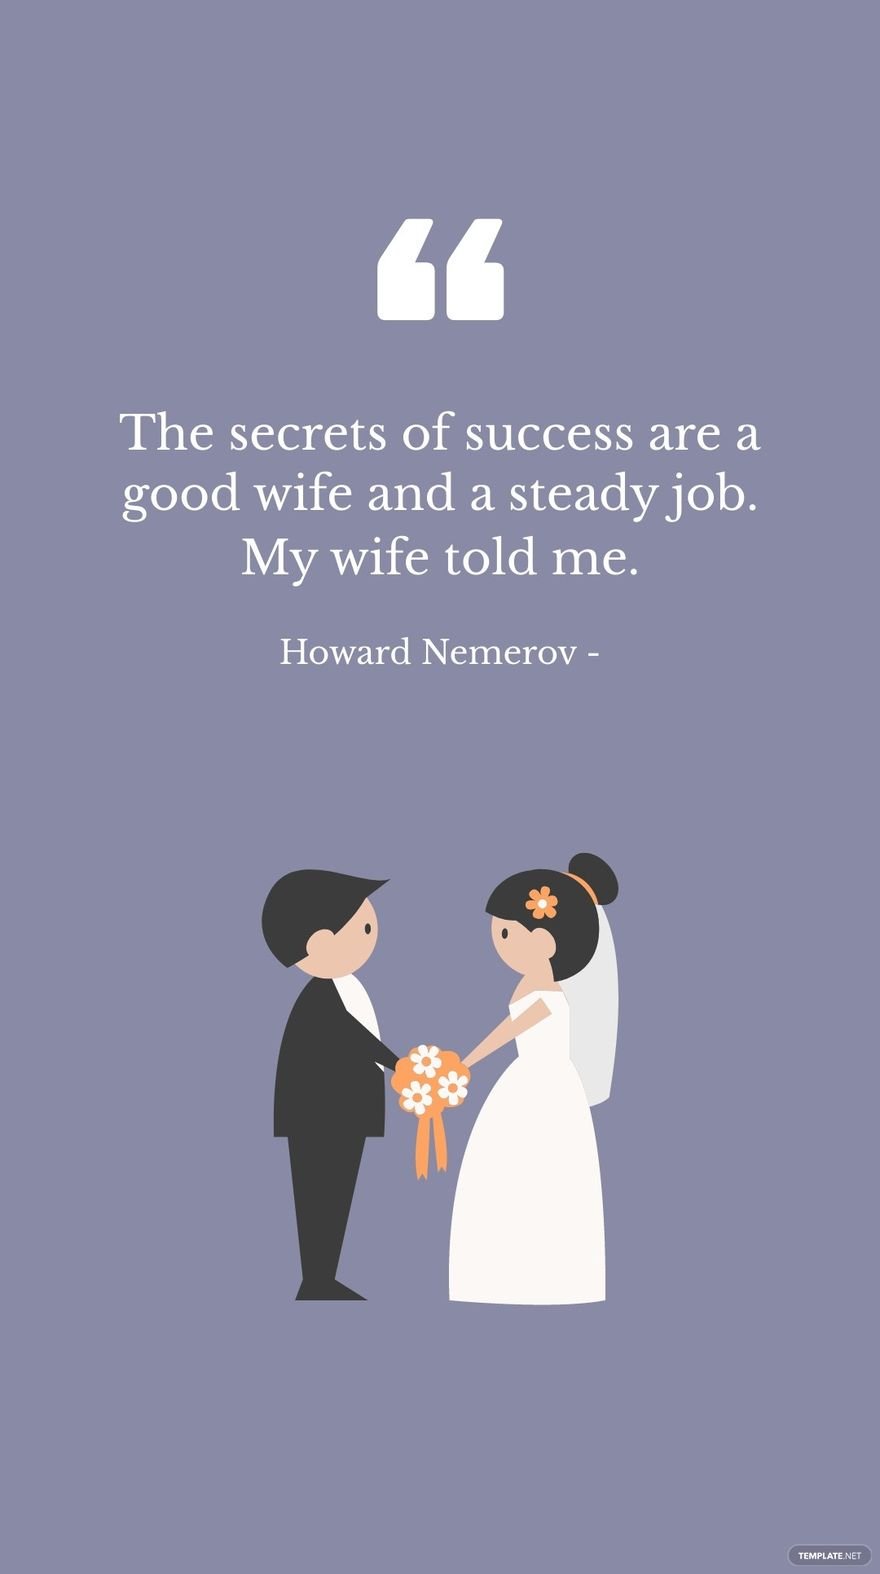 Howard Nemerov - The secrets of success are a good wife and a steady job. My wife told me.